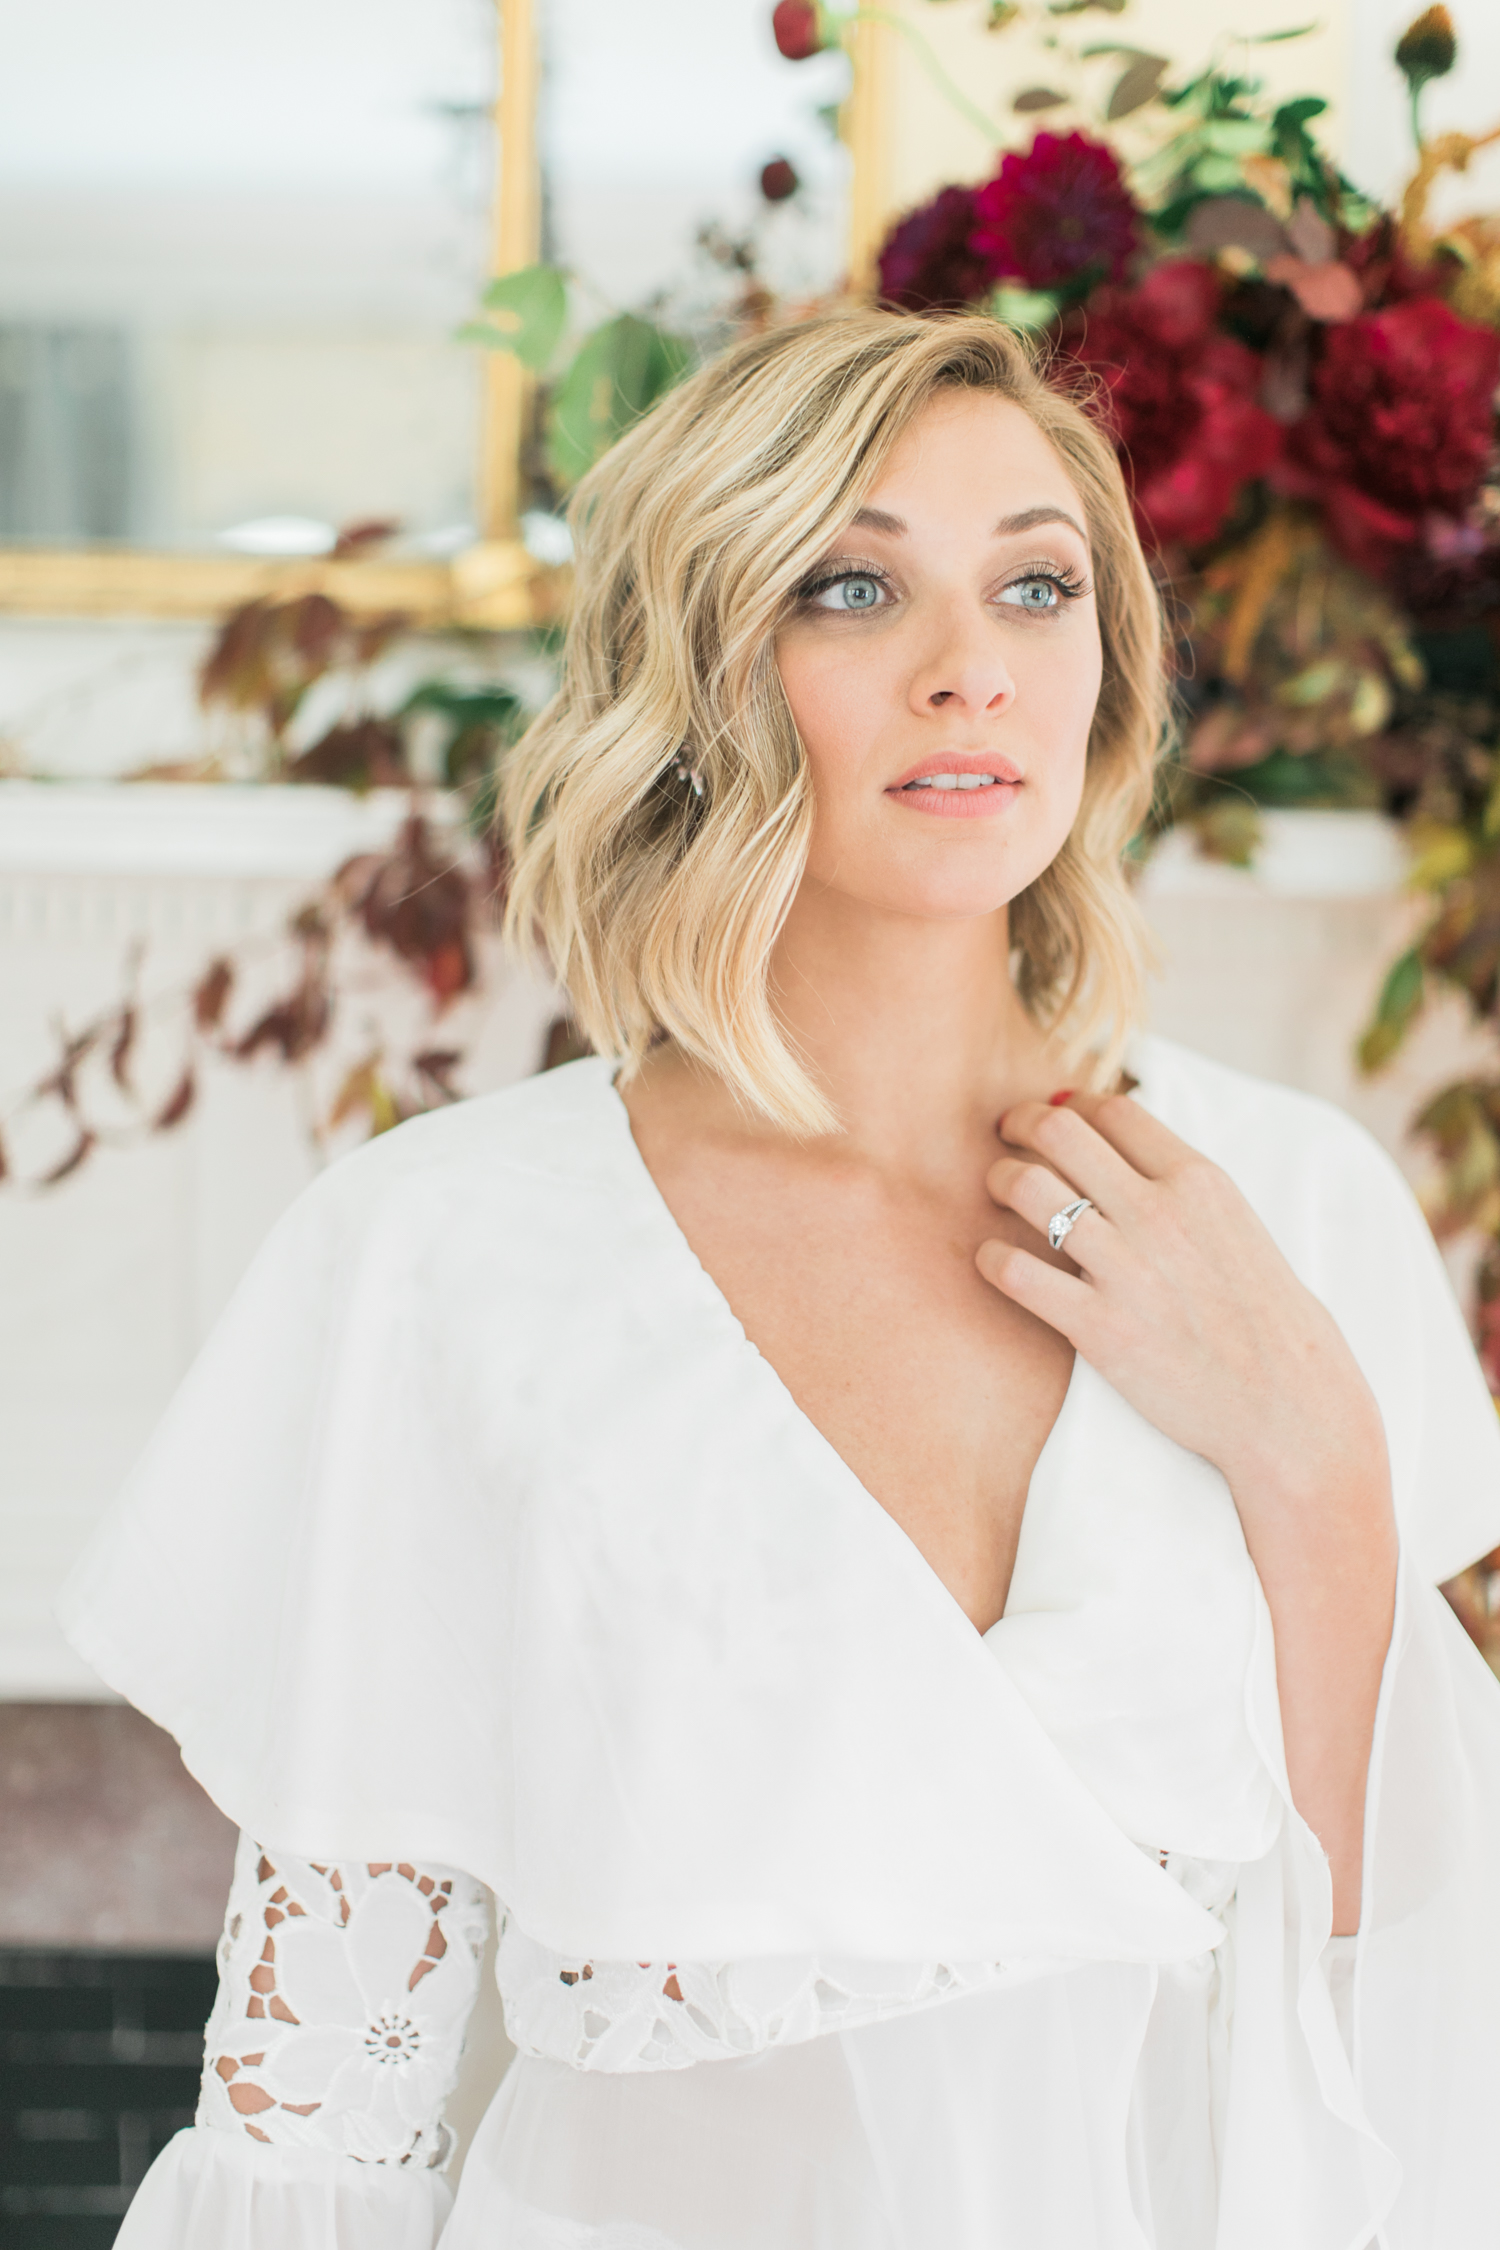 Legare Waring House Wedding Photography | Charleston Wedding Photographer | Charleston Film Photographer | Molly Carr Photography | The Petal Report | Emily Kotarski Bridal | Charleston Boudoir Photography | Bride Standing by Fireplace | Wedding Mantle Decor